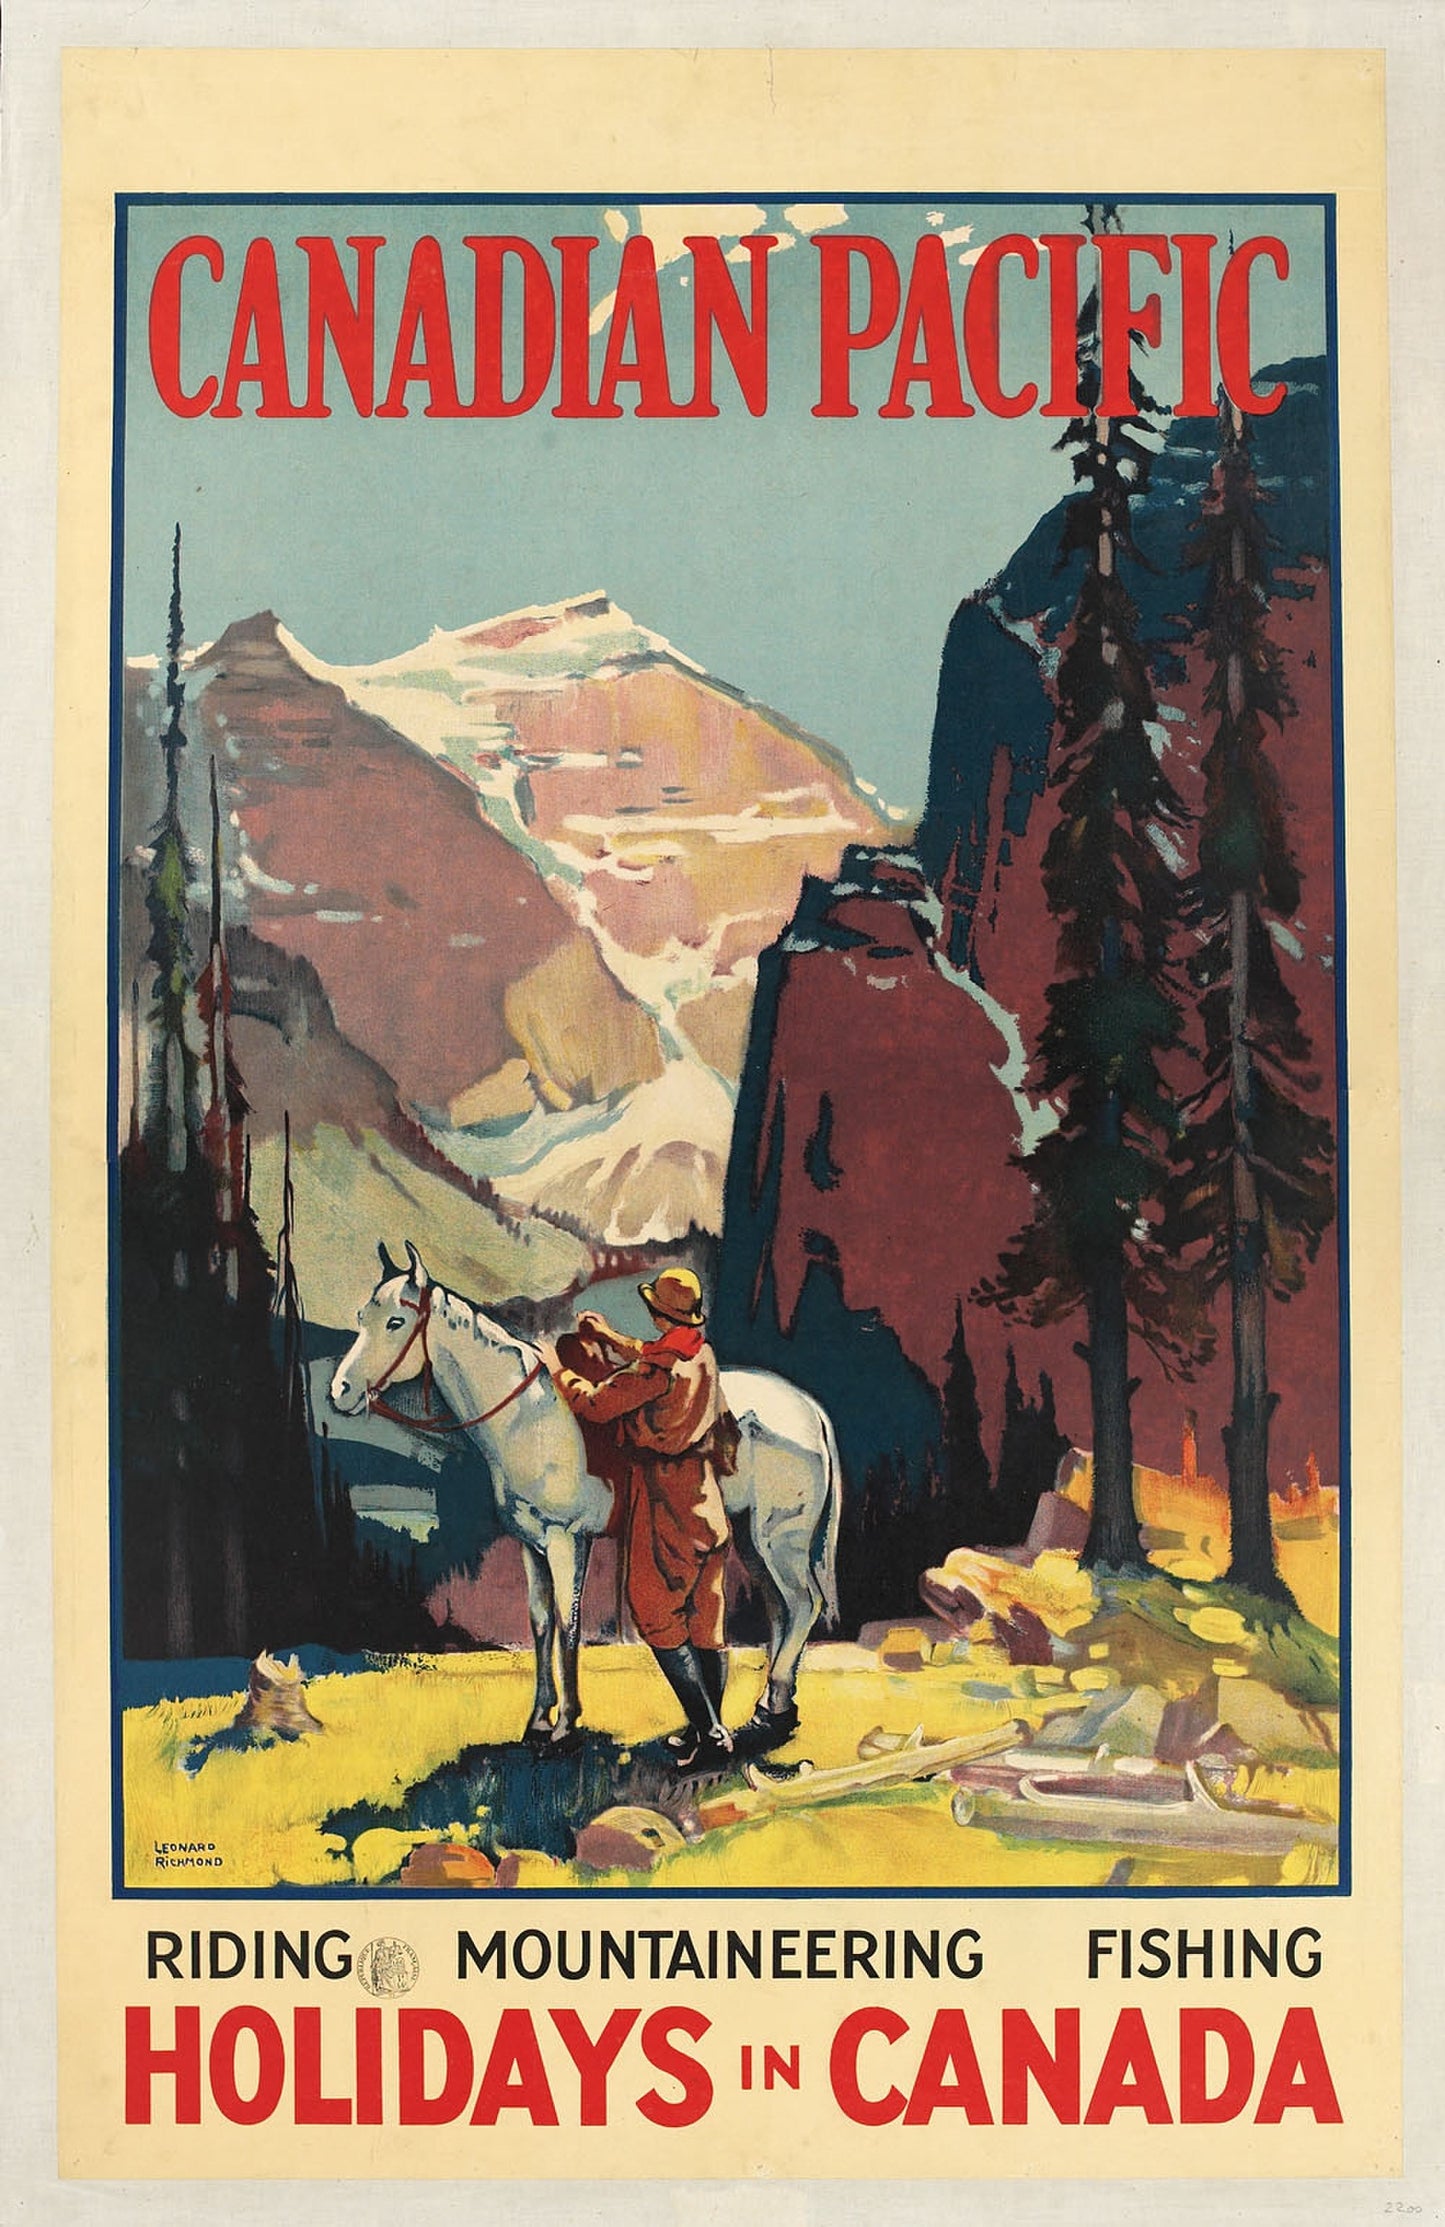 Canadian Pacific Holidays Poster (1920s) | Toilet wall art prints Posters, Prints, & Visual Artwork The Trumpet Shop   